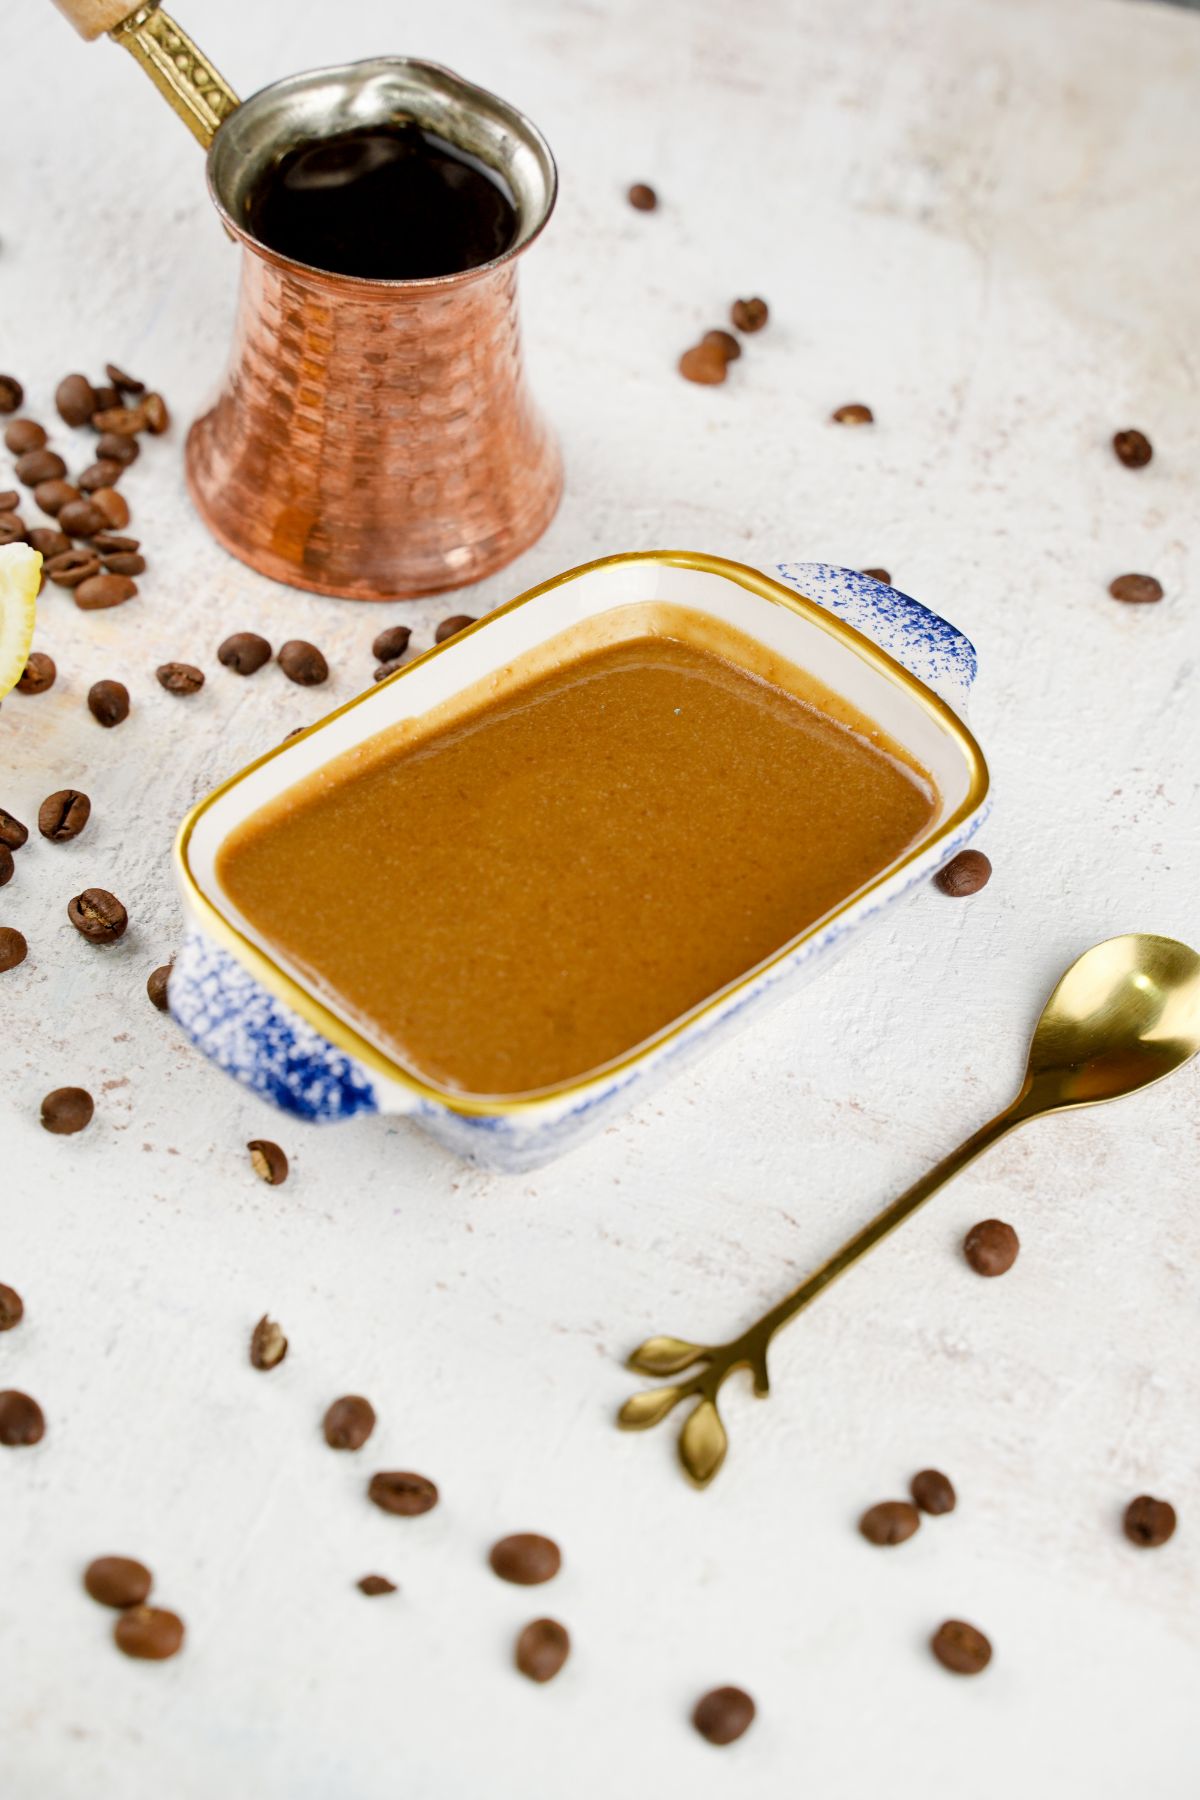 No Bake Espresso Creme Brulee with golden spoon